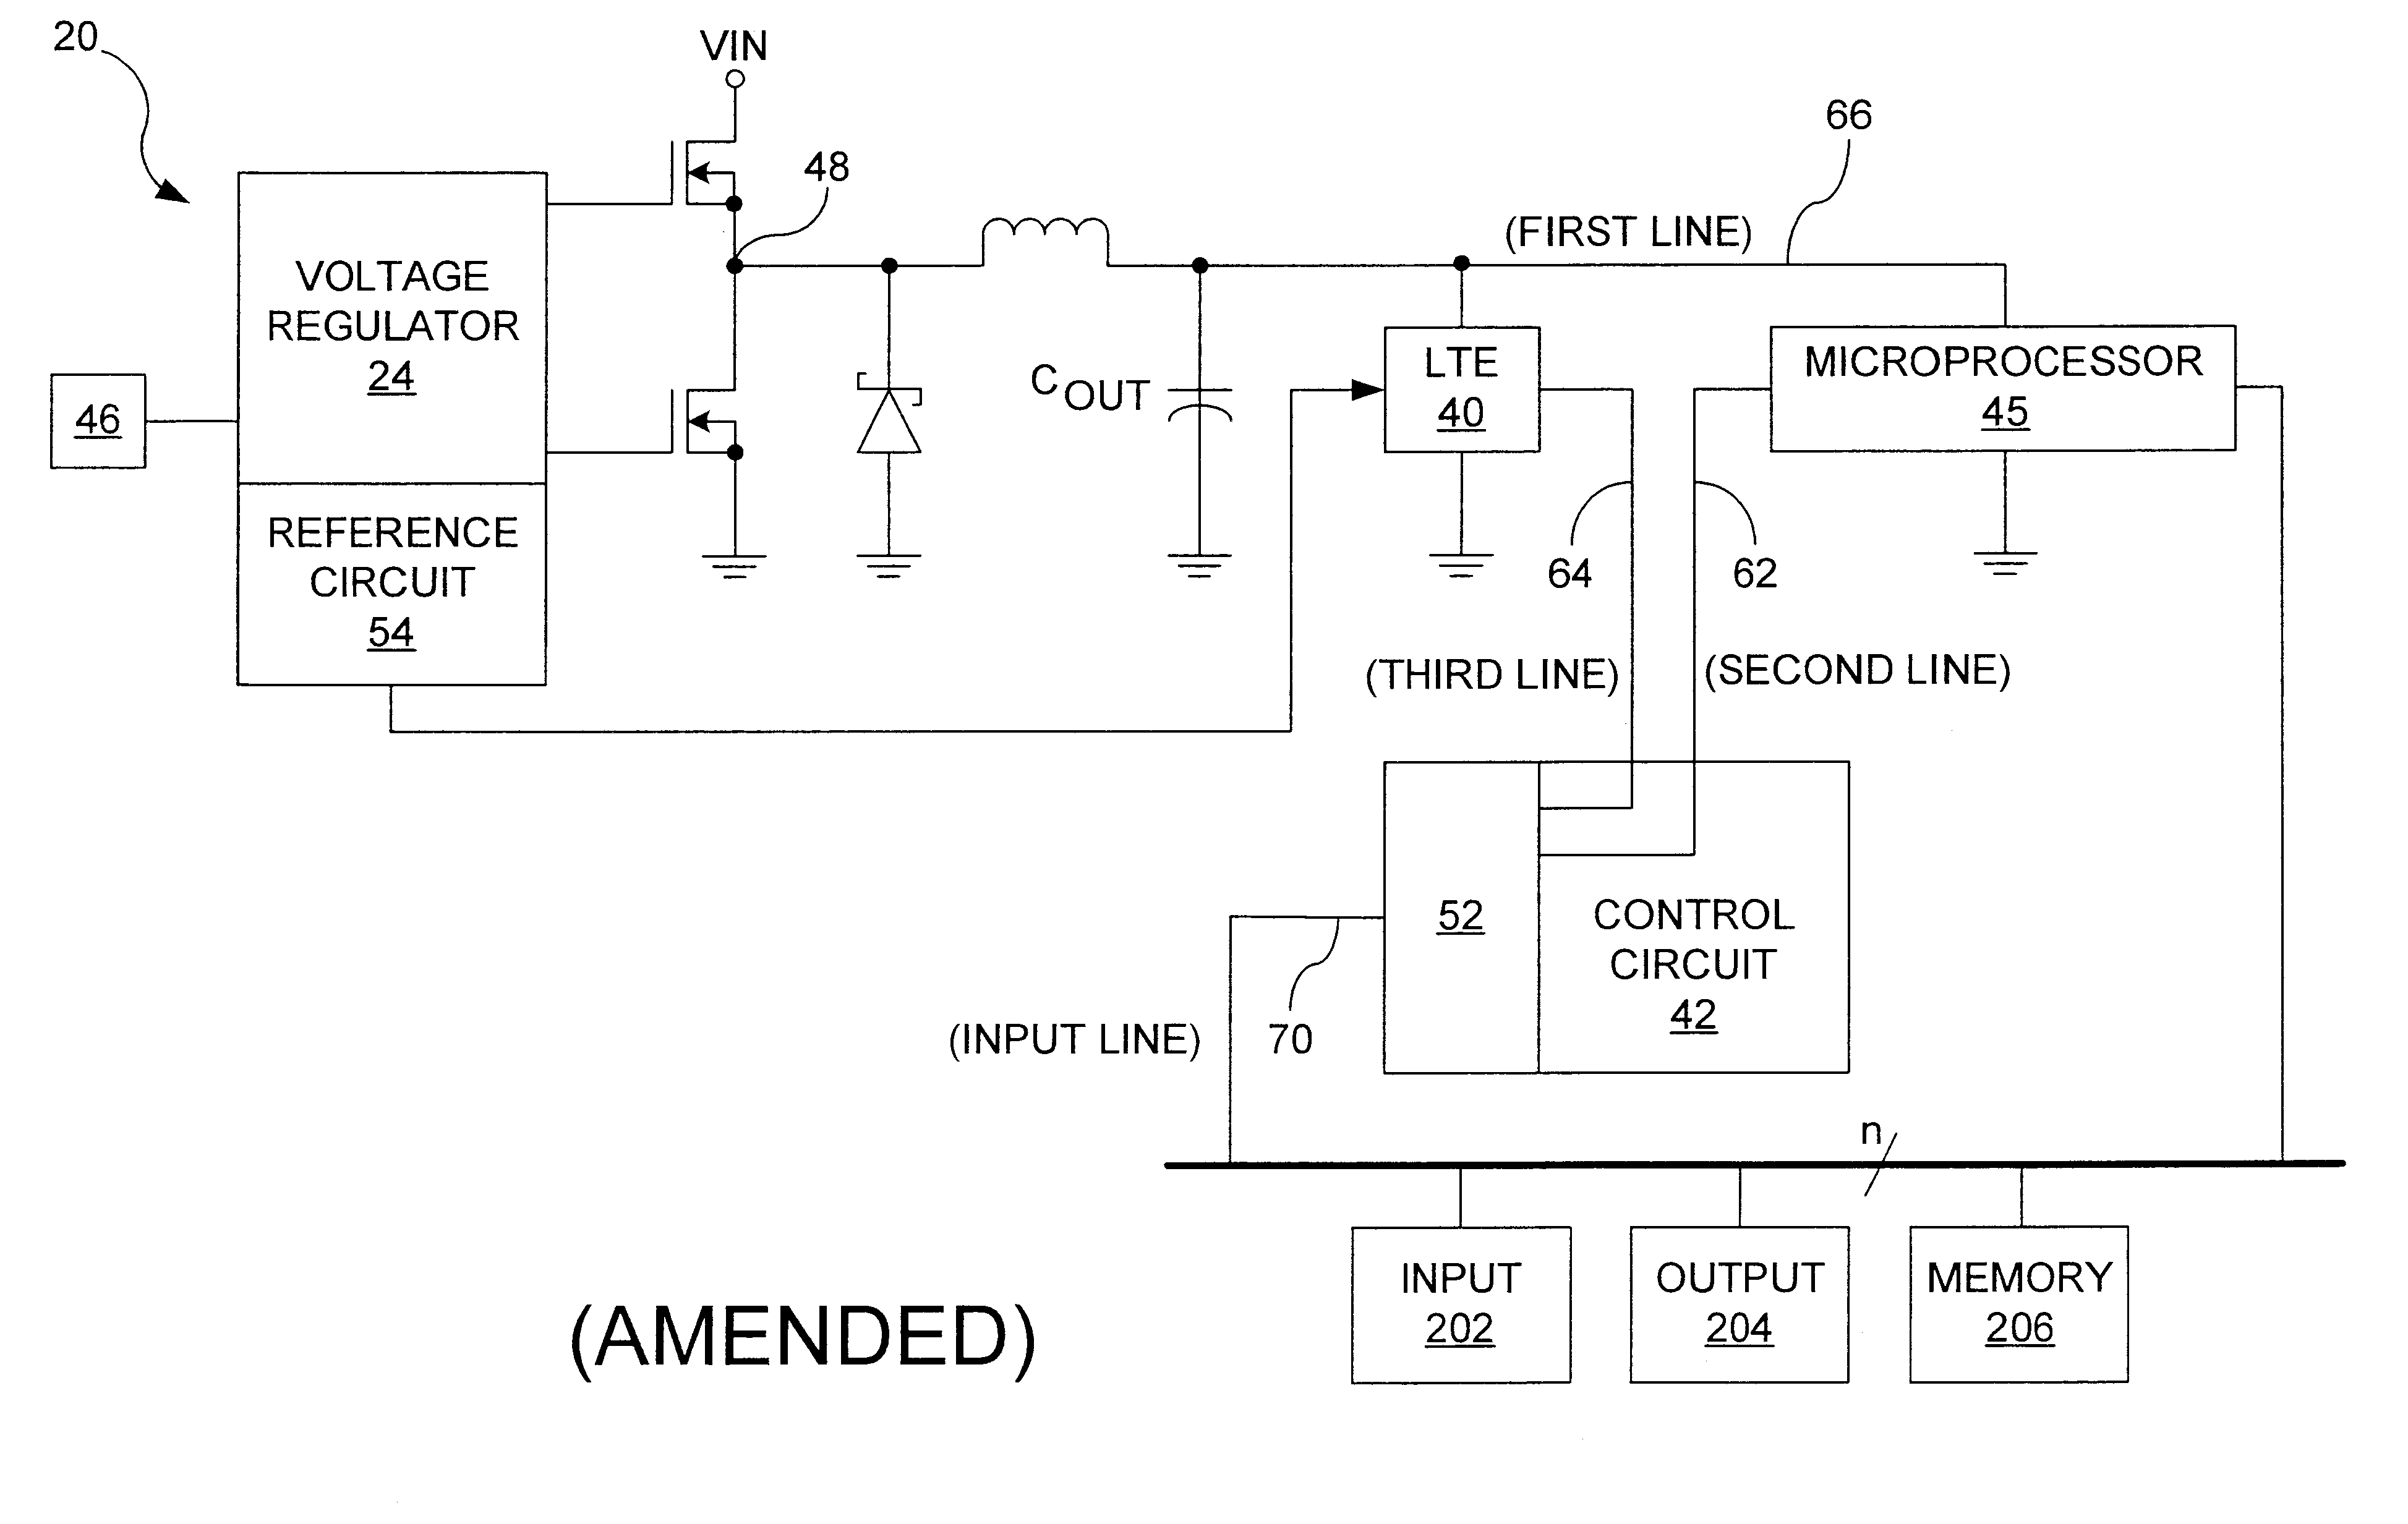 Programmable load transient compensator for reducing the transient response time to a load capable of operating at multiple power consumption levels